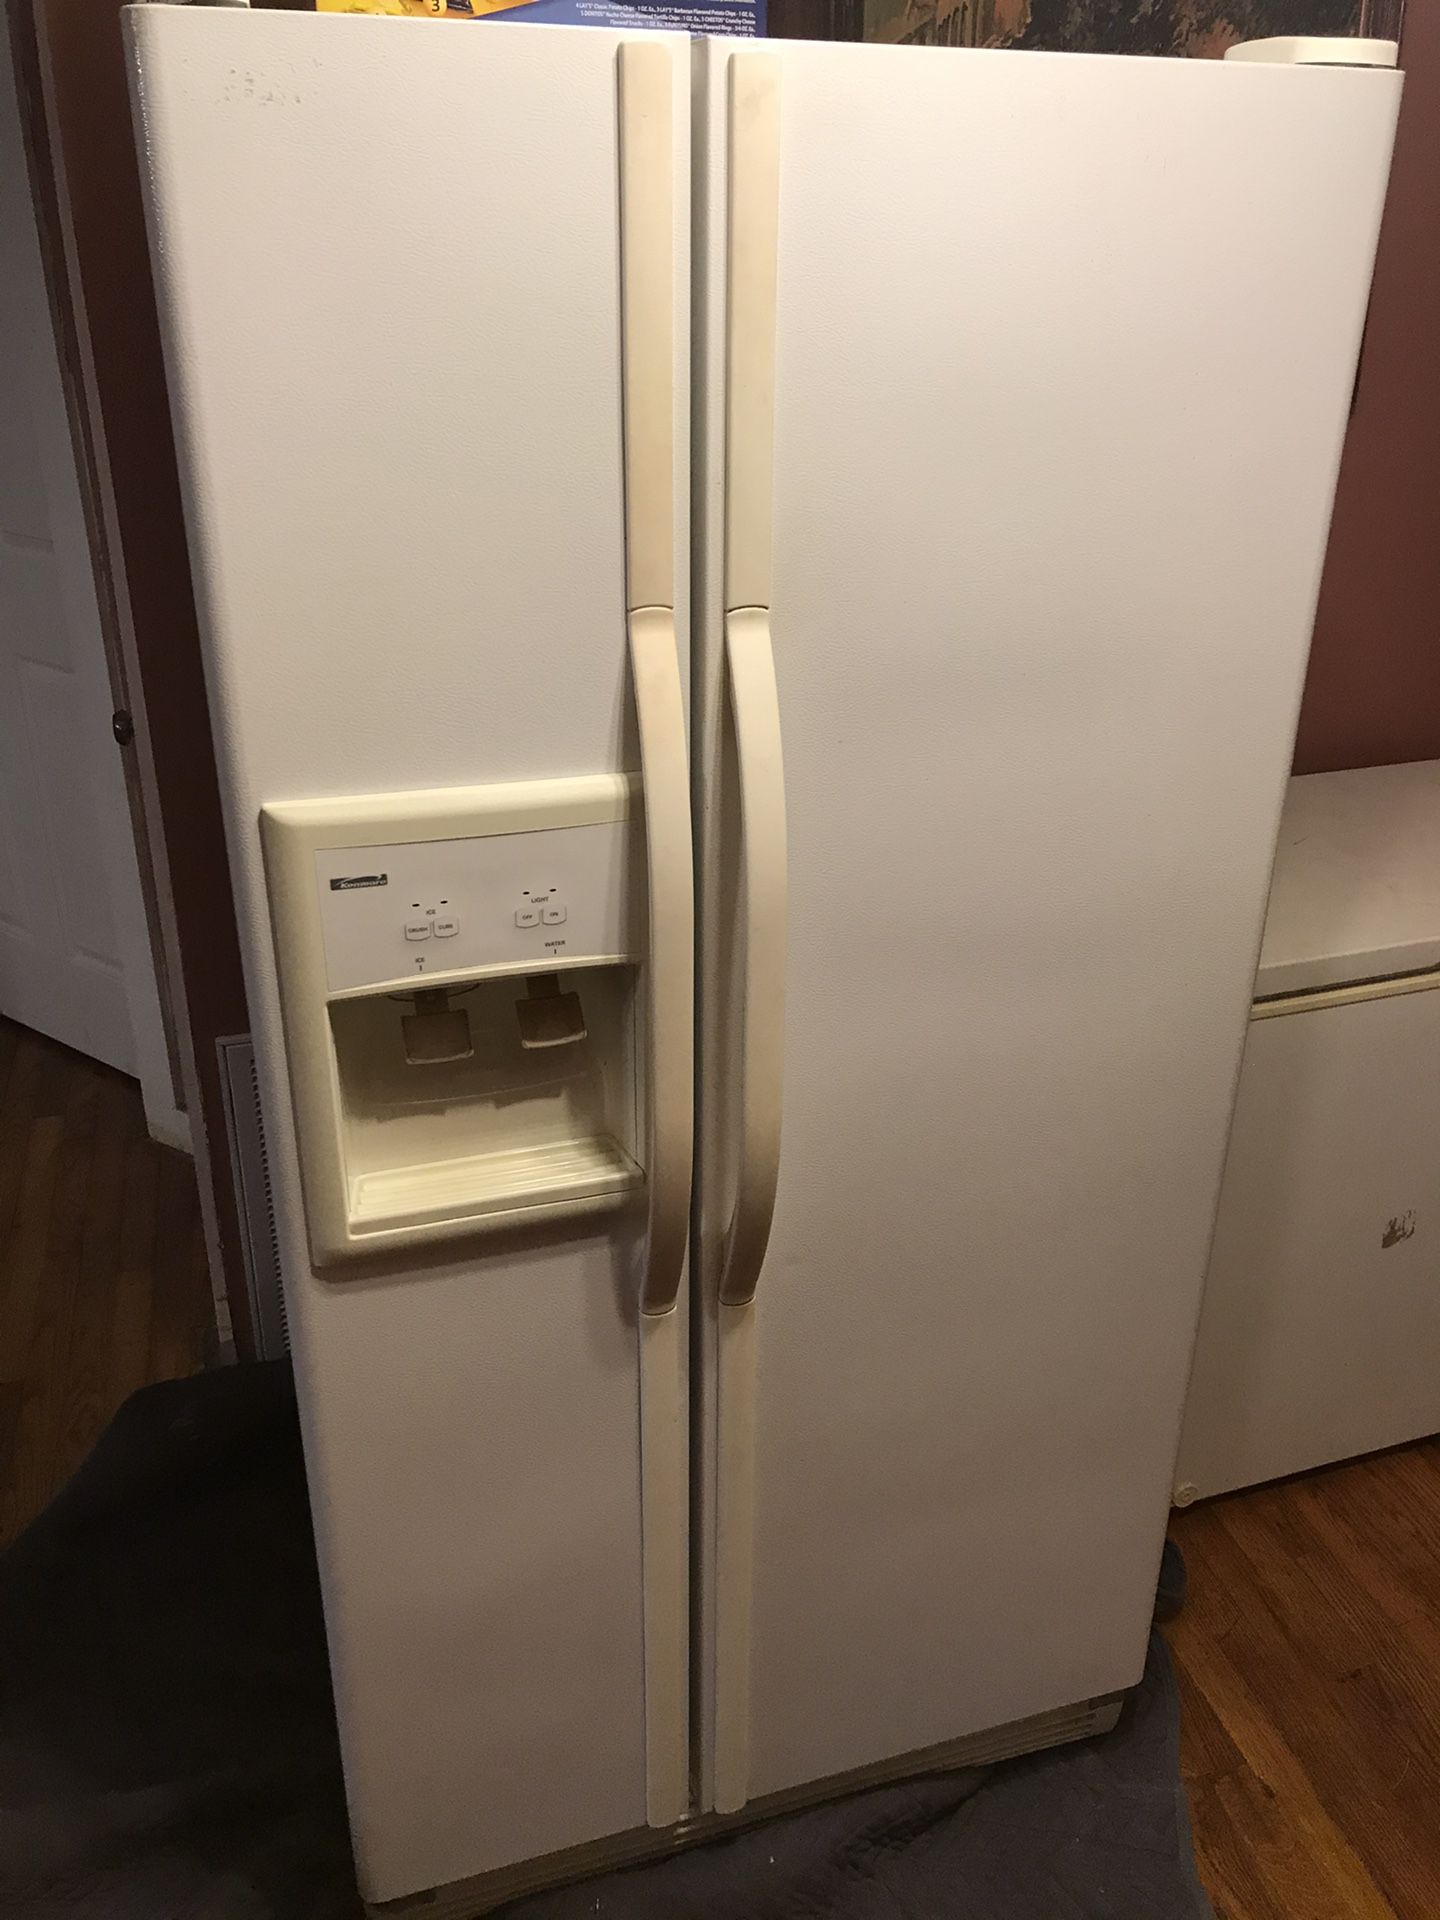 Kenmore side-by-side refrigerator